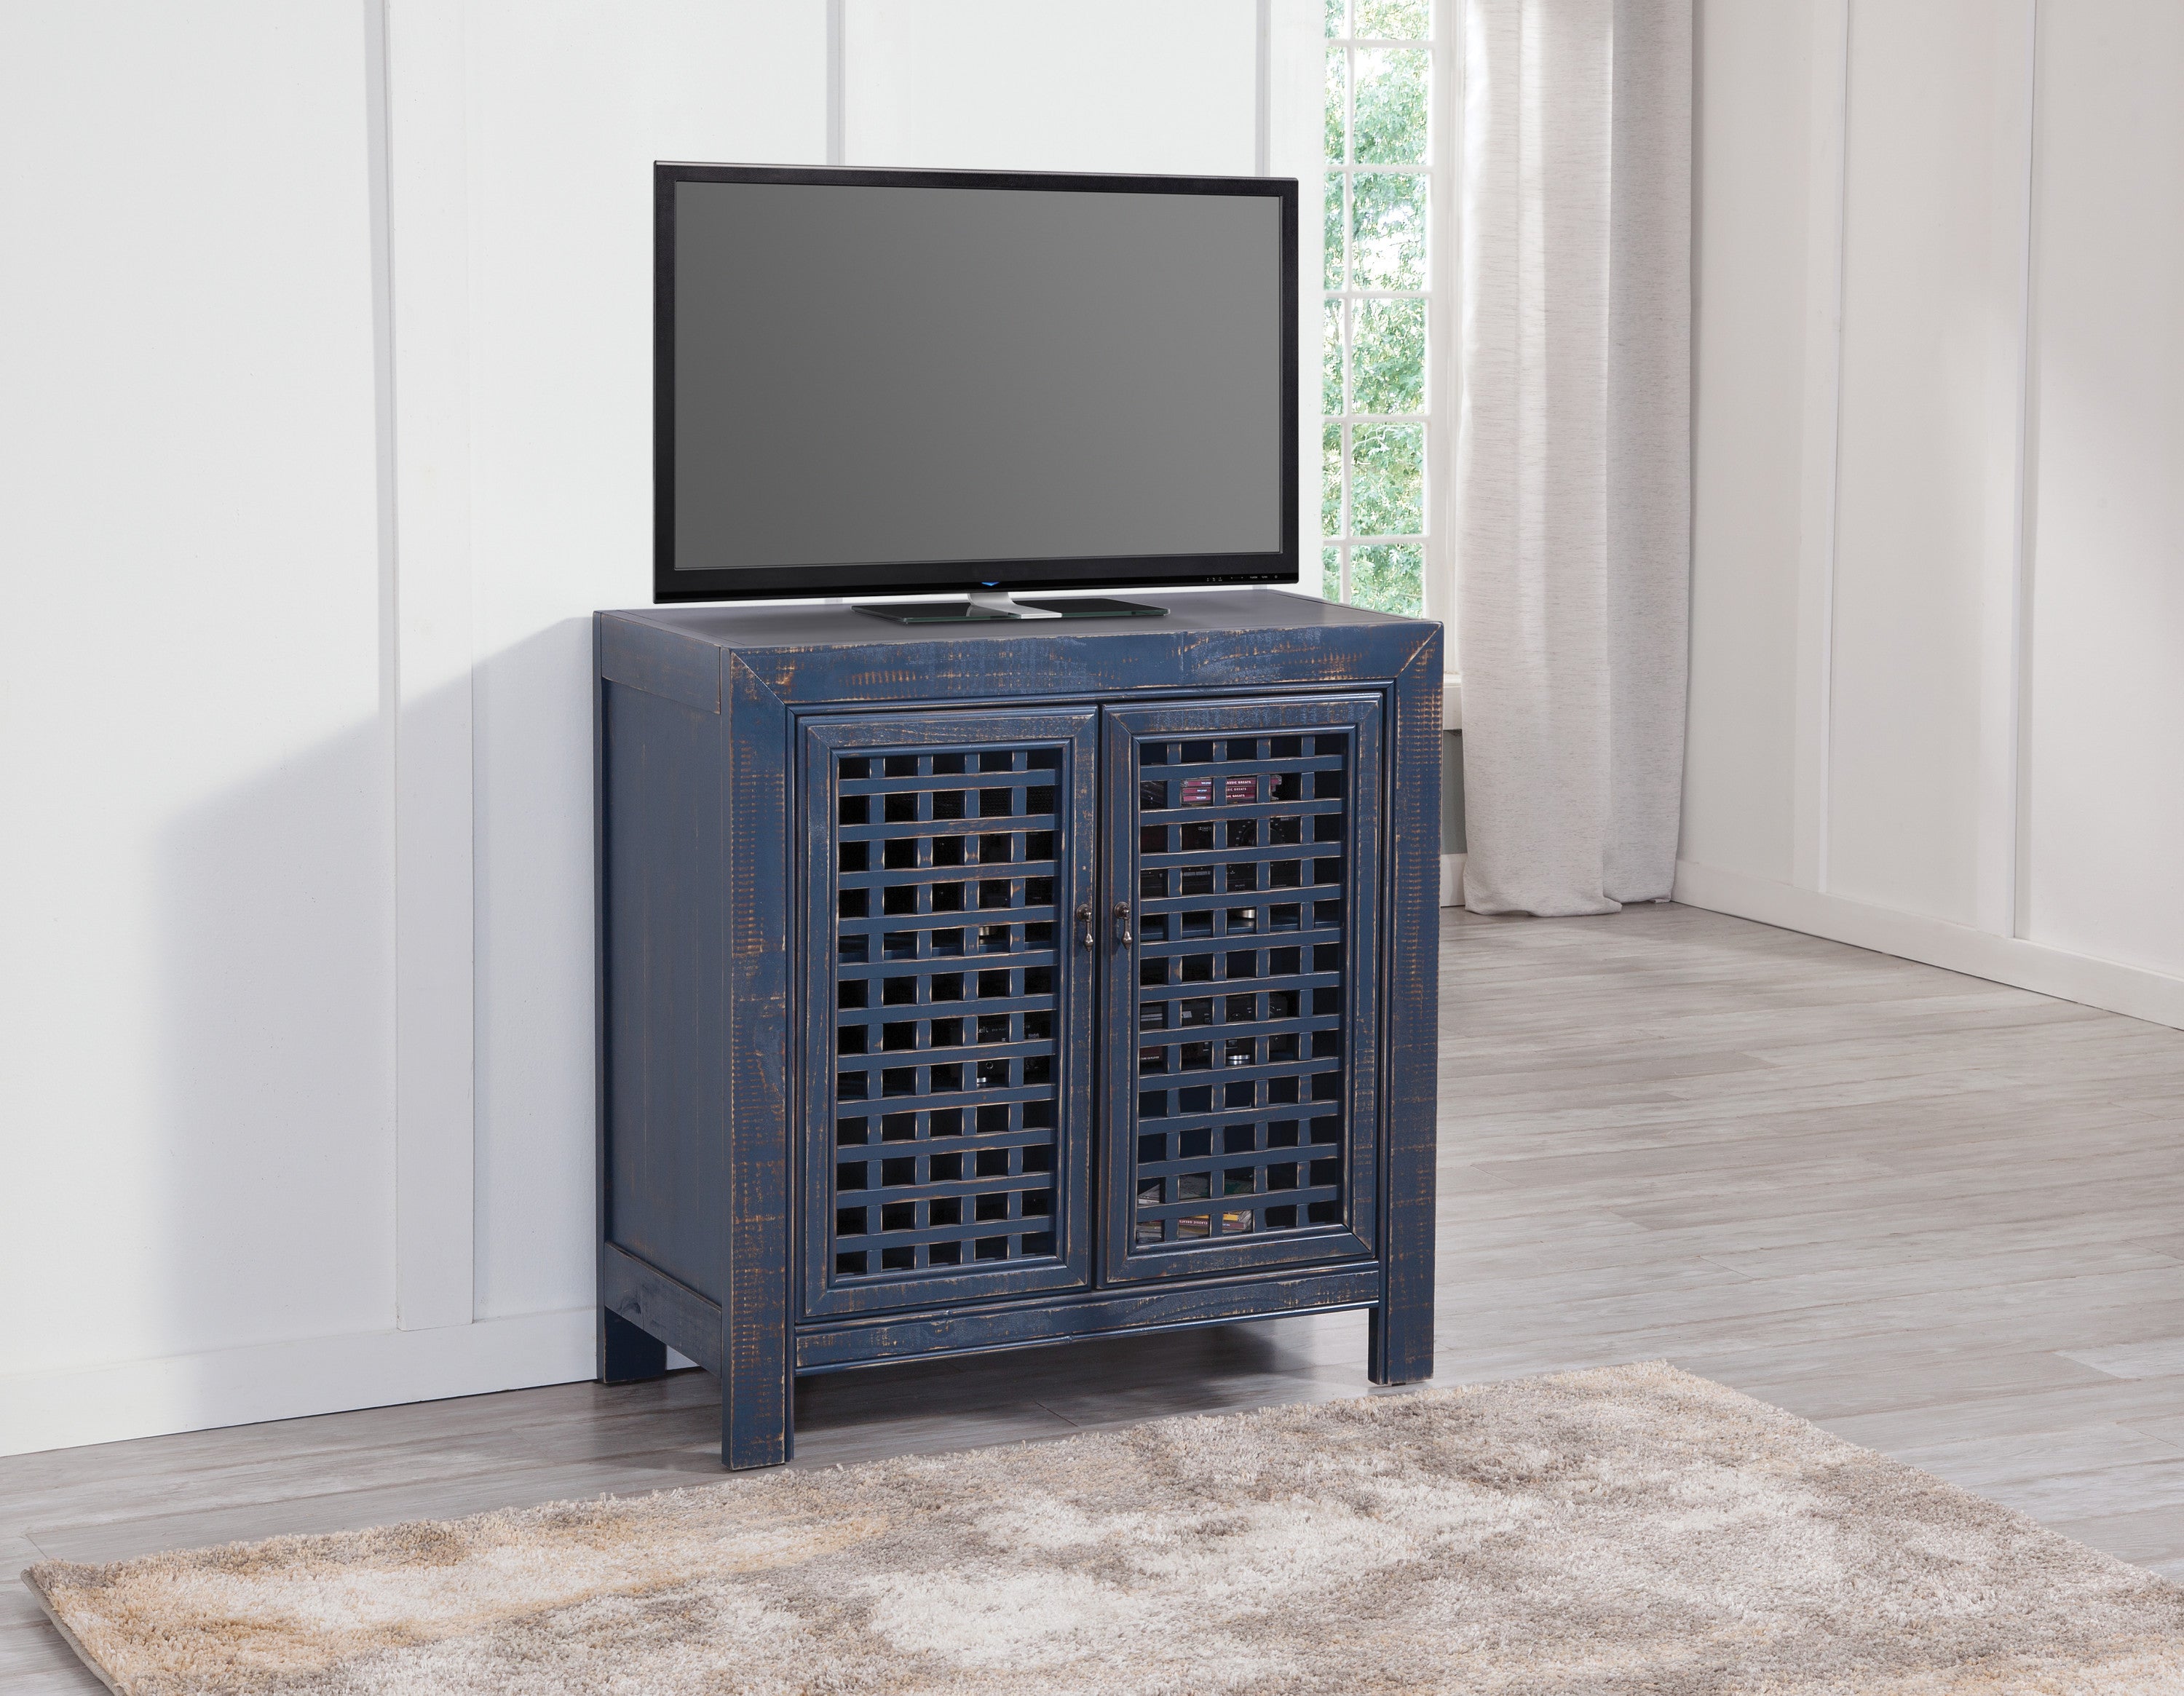 Farmhouse Style Accent Cabinet, Lattice Work Front - Distressed Navy Finish